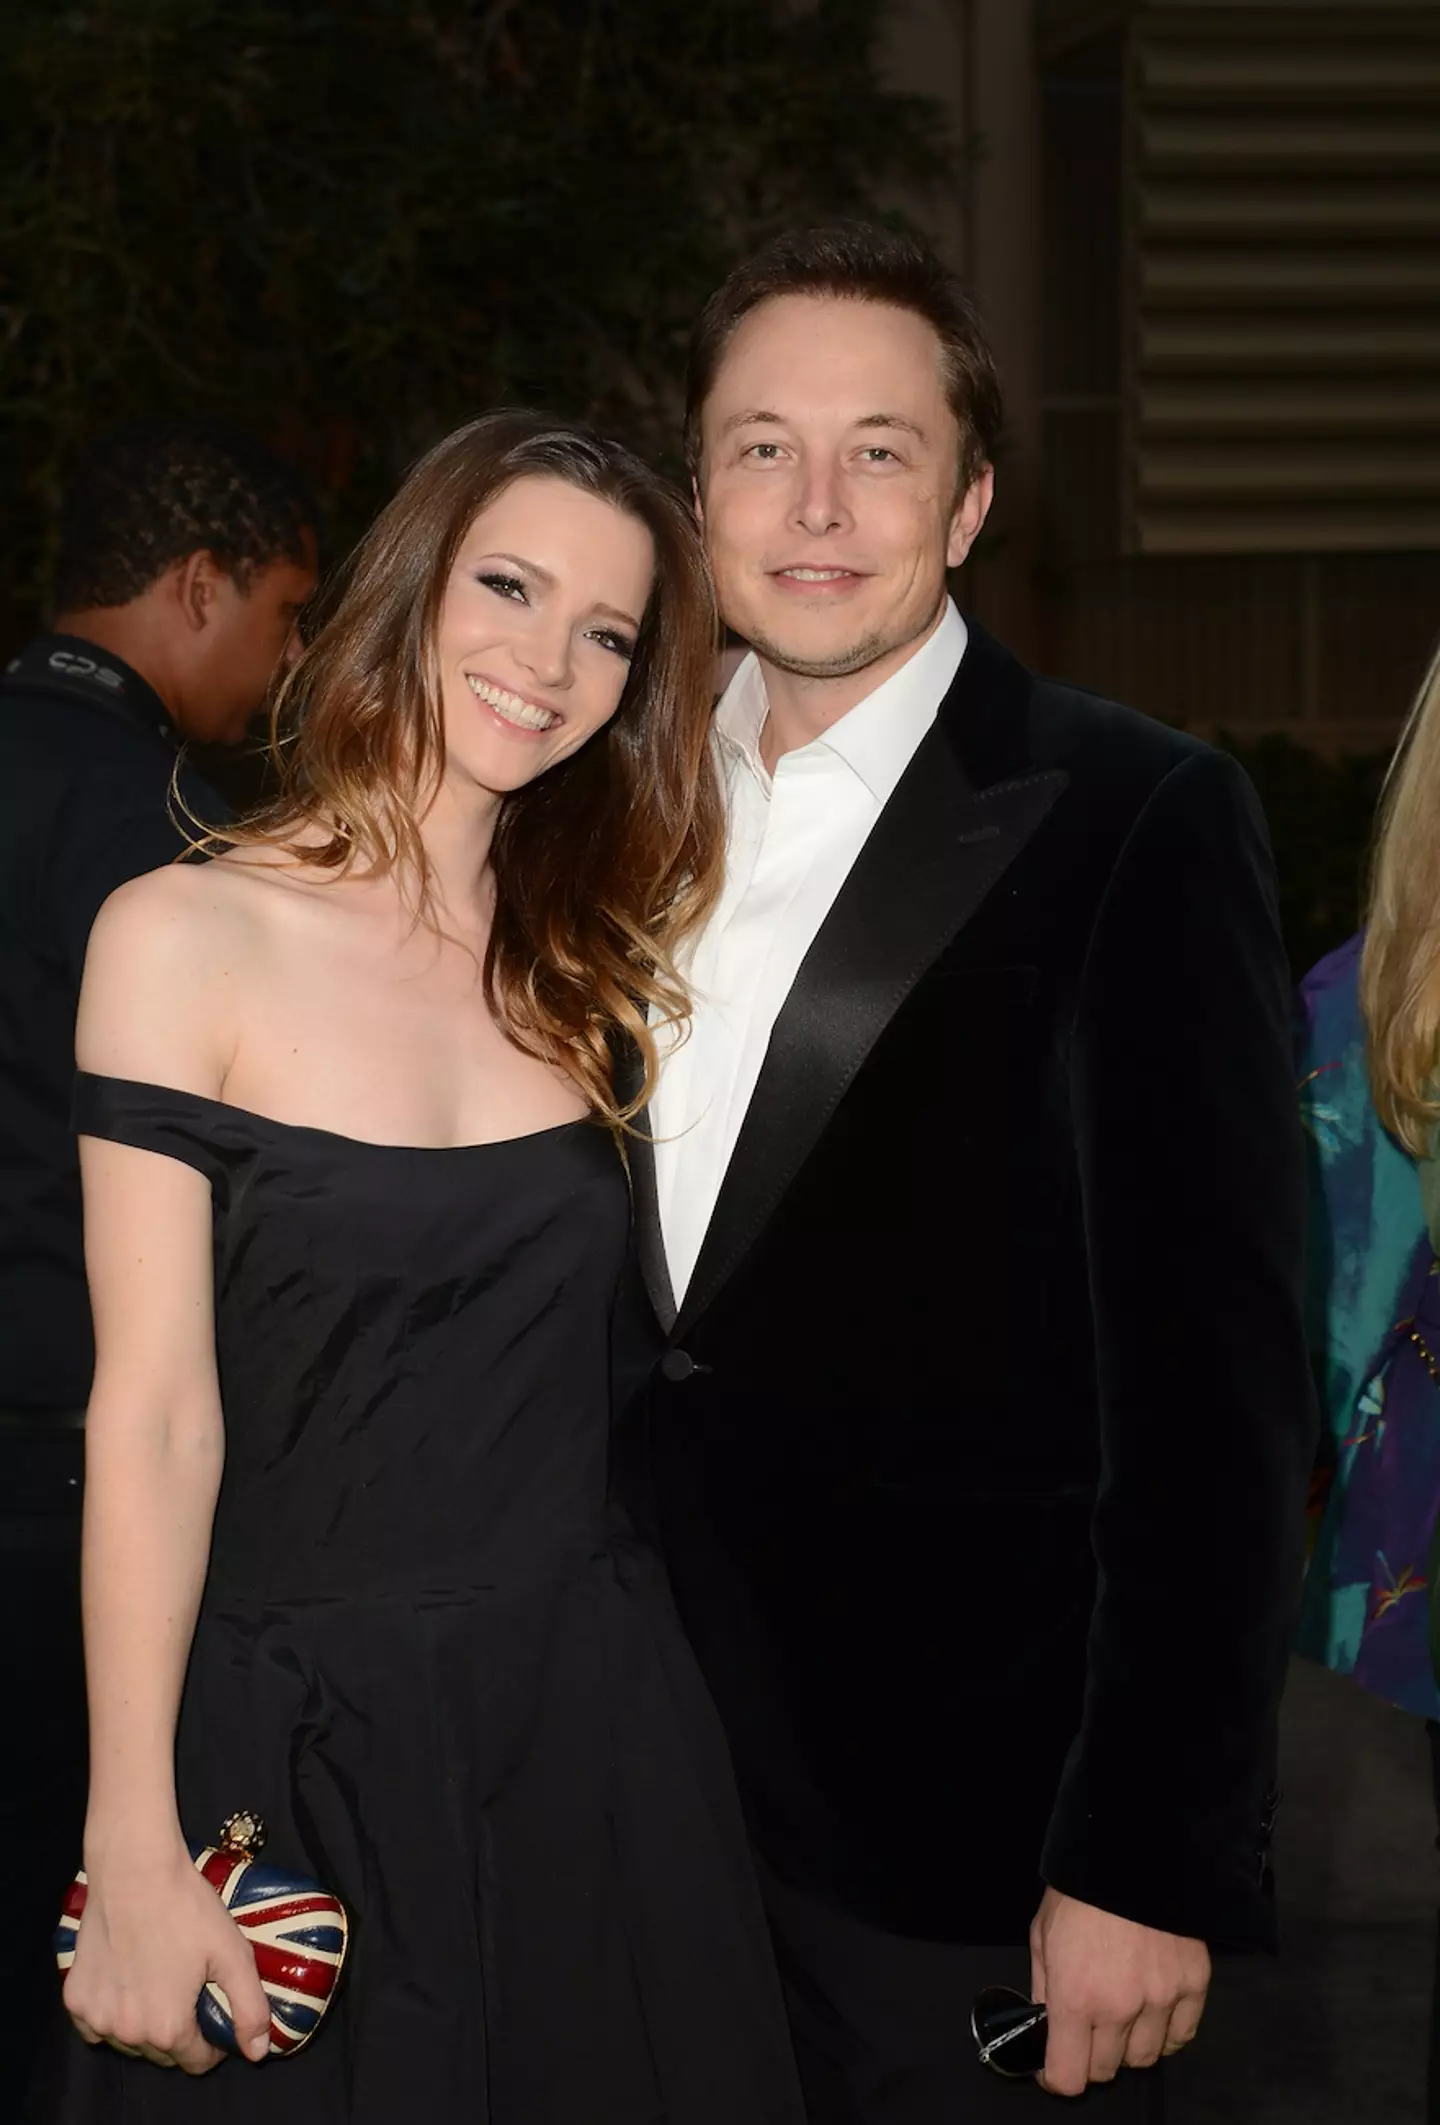 Riley was previously married to Musk - twice.